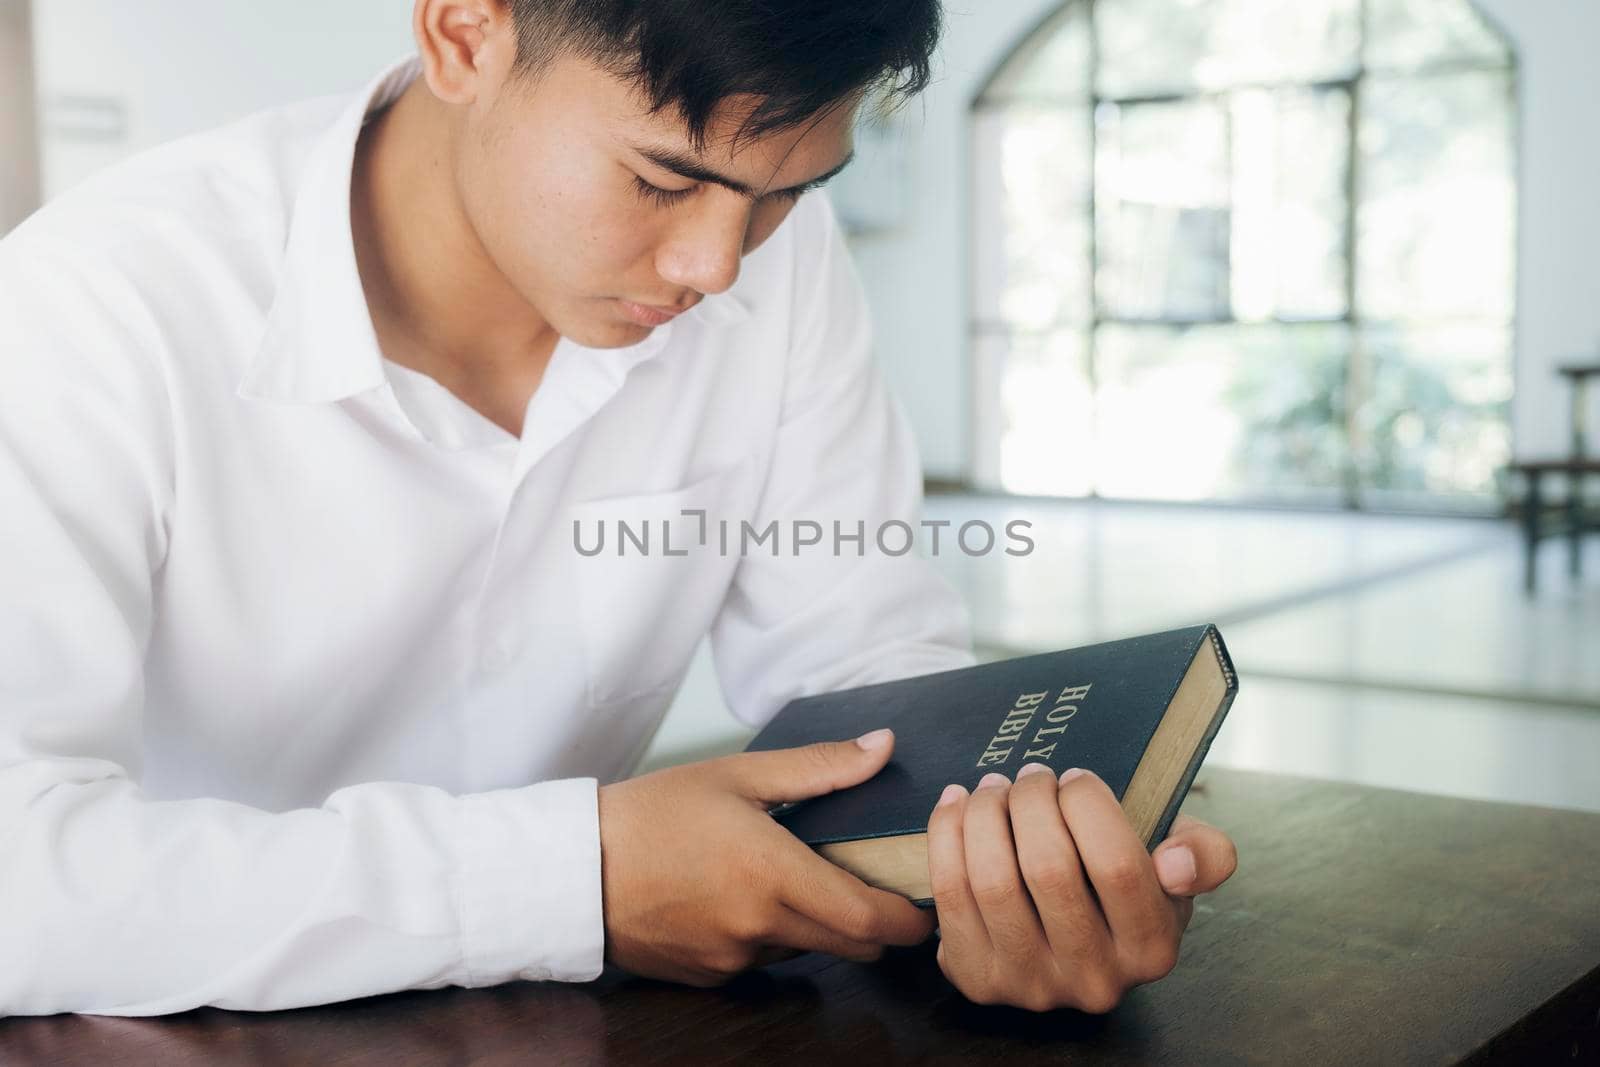 Religion, Christianity, Praying. Man praying, hands clasped together on her Bible.